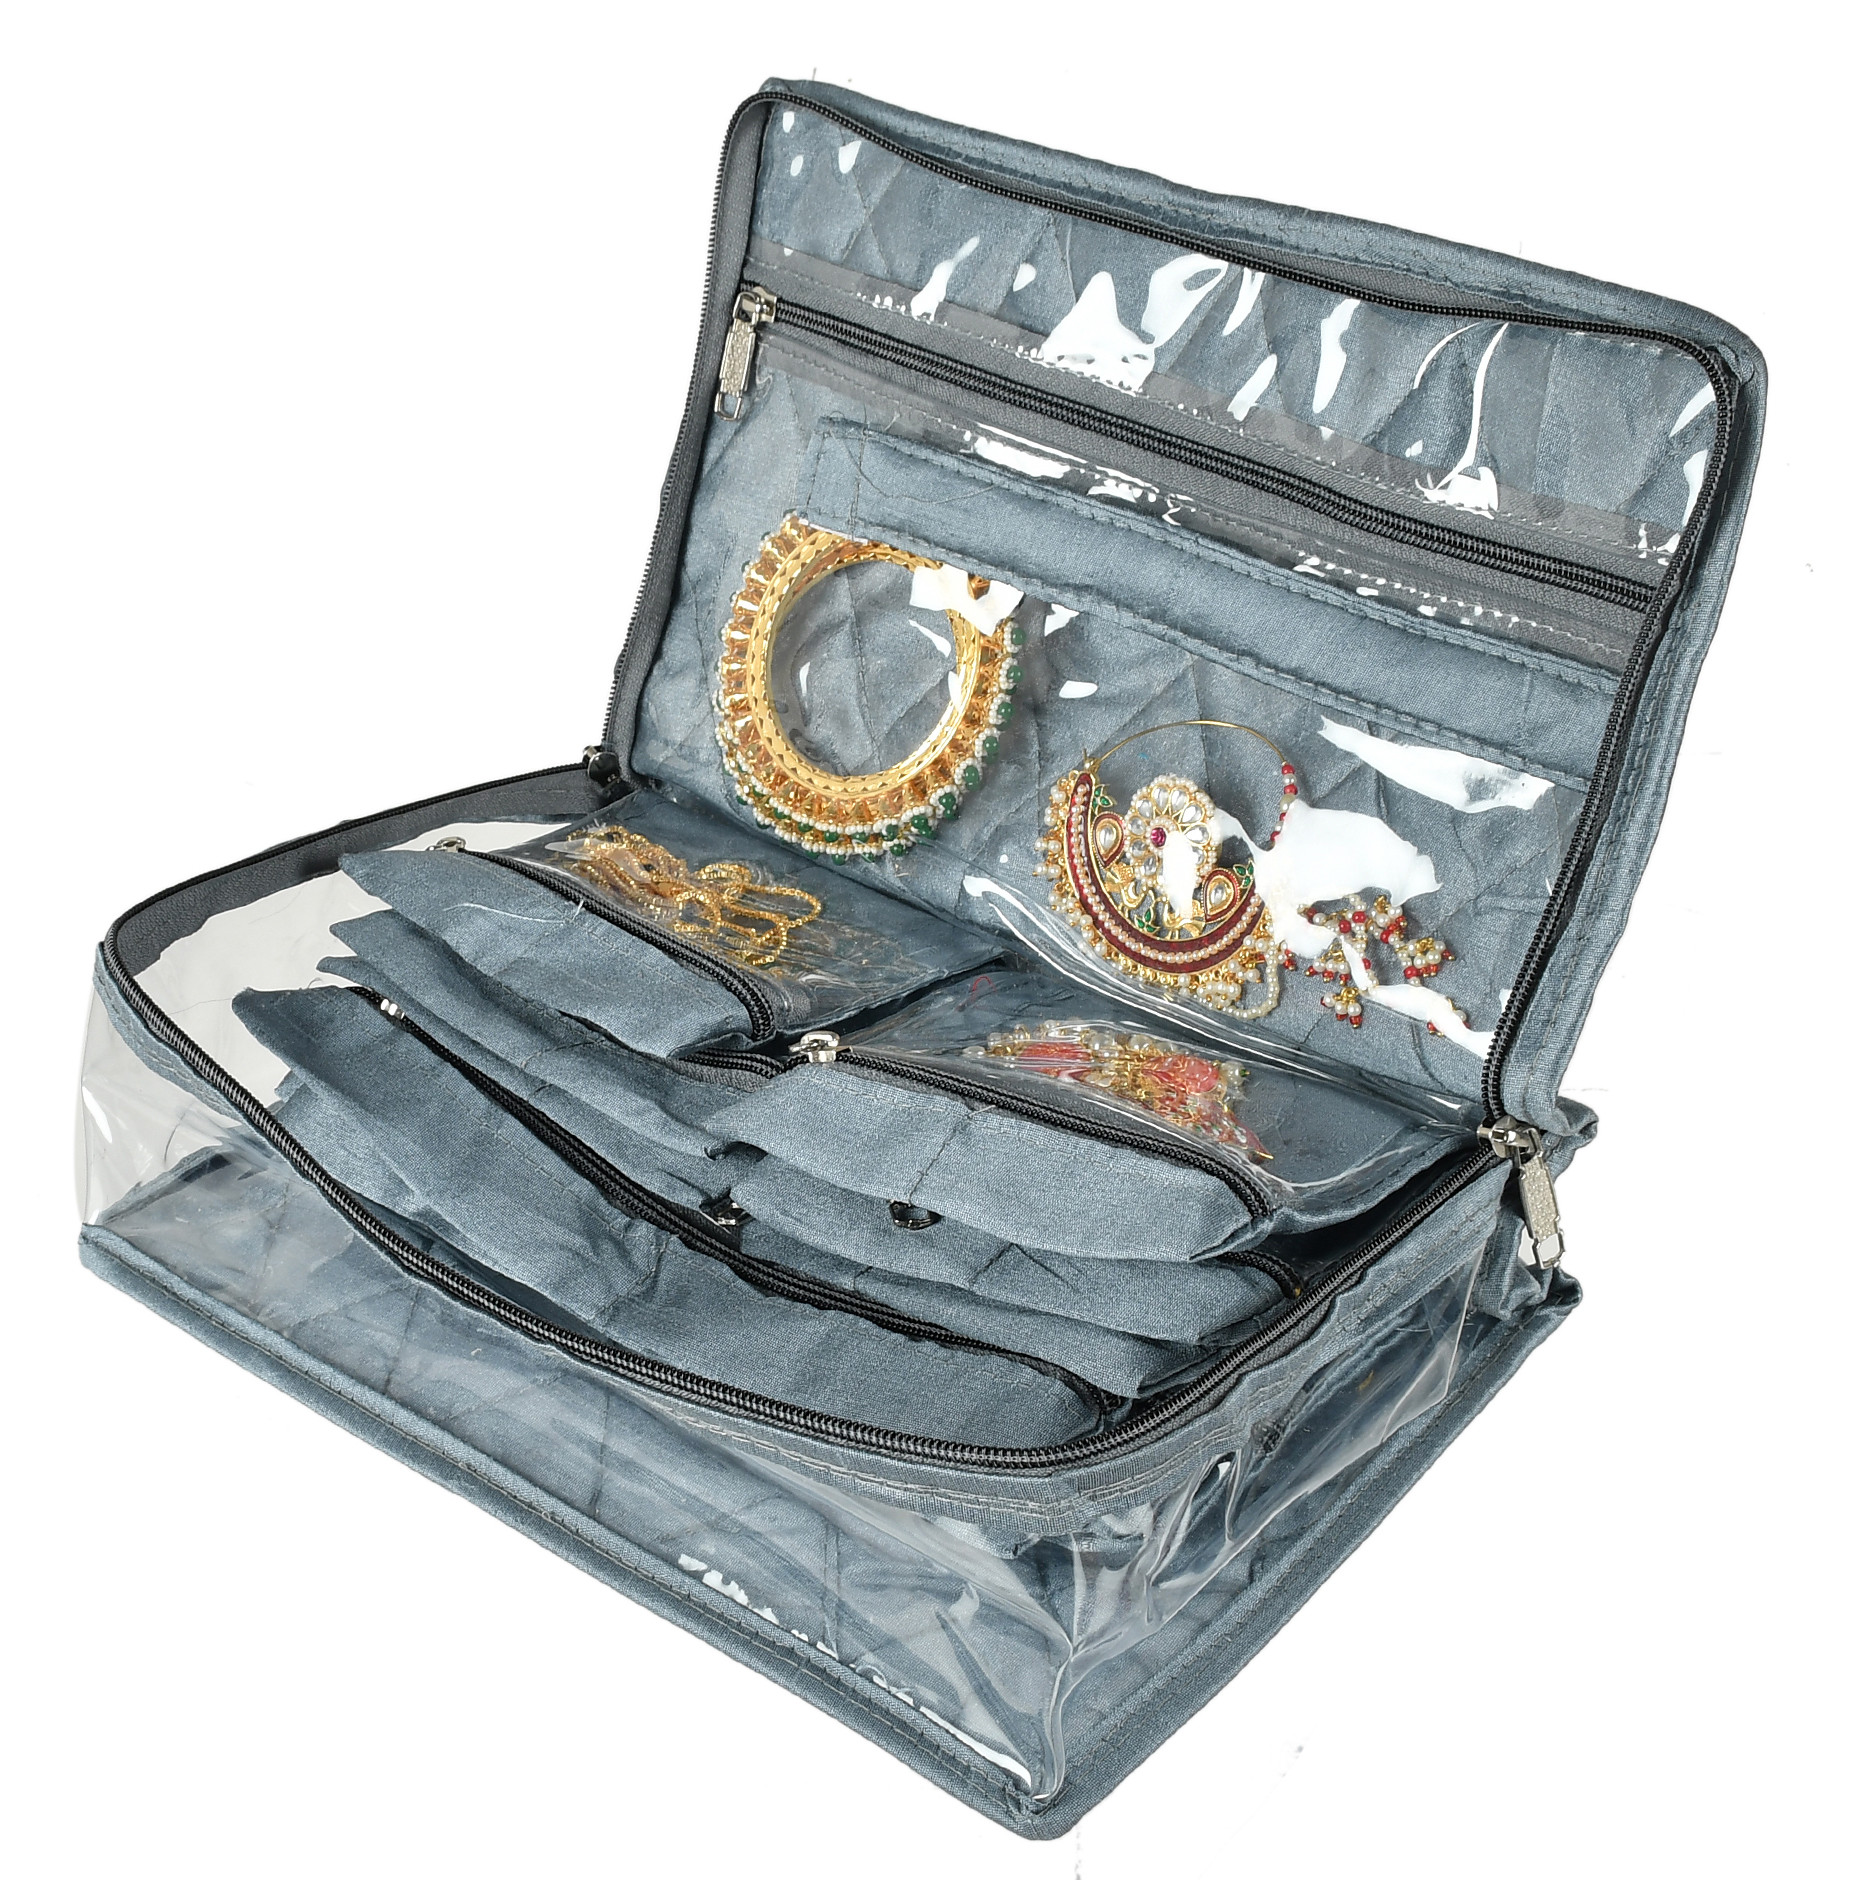 Kuber Industries Laminated PVC Travel Jewelry Organiser, Jewelry Storage Bags for Necklace, Earrings, Rings, Bracelet With 13 Transparent Pouches (Grey)-HS_38_KUBMART21371